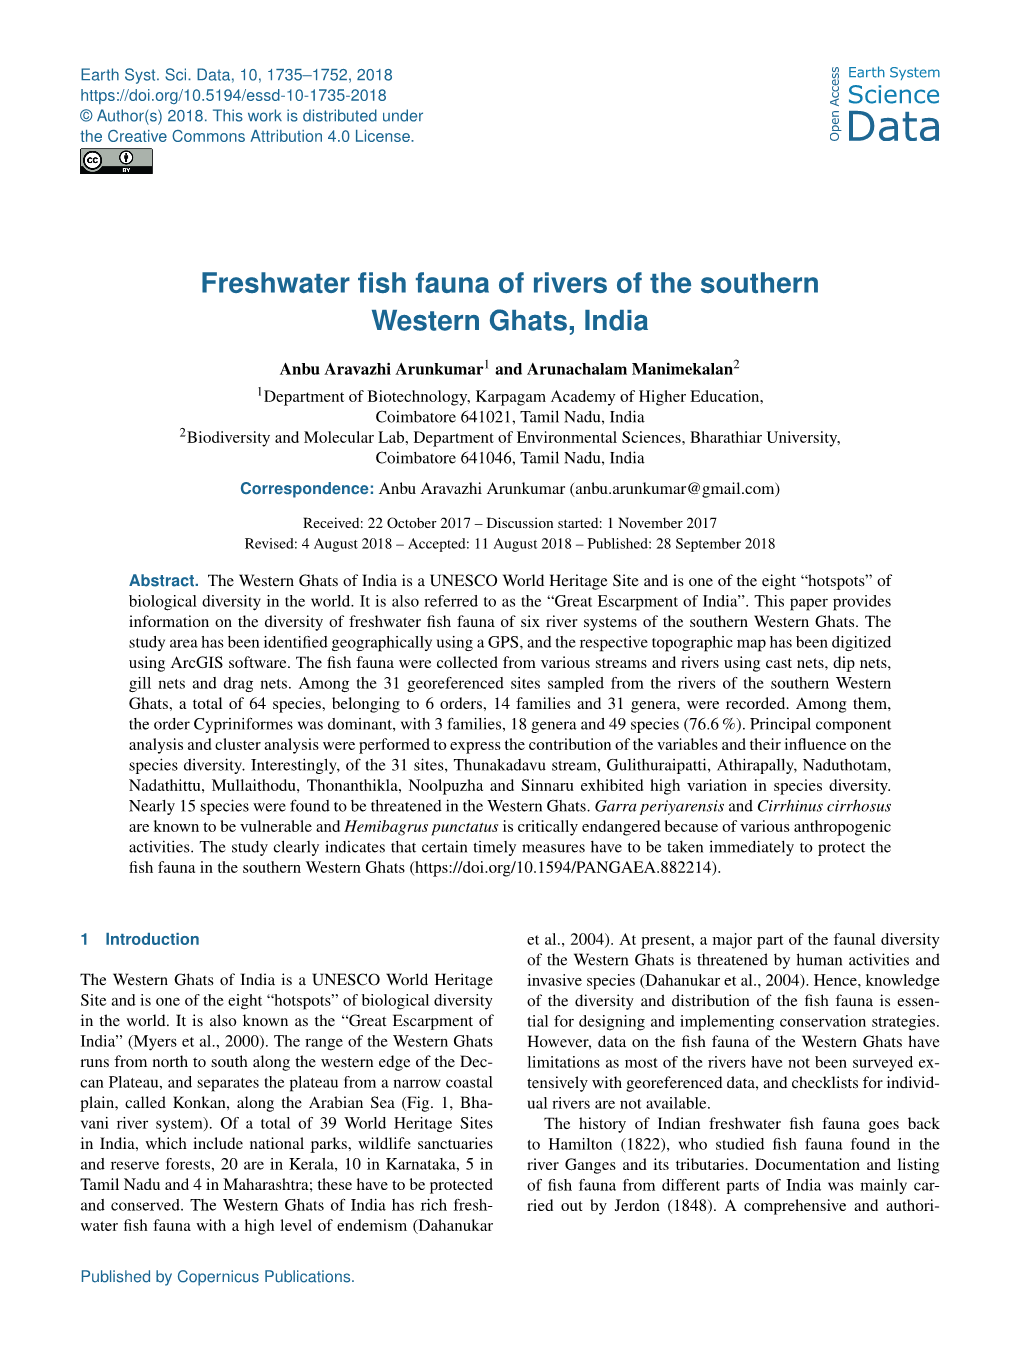 Freshwater Fish Fauna of Rivers of the Southern Western Ghats, India